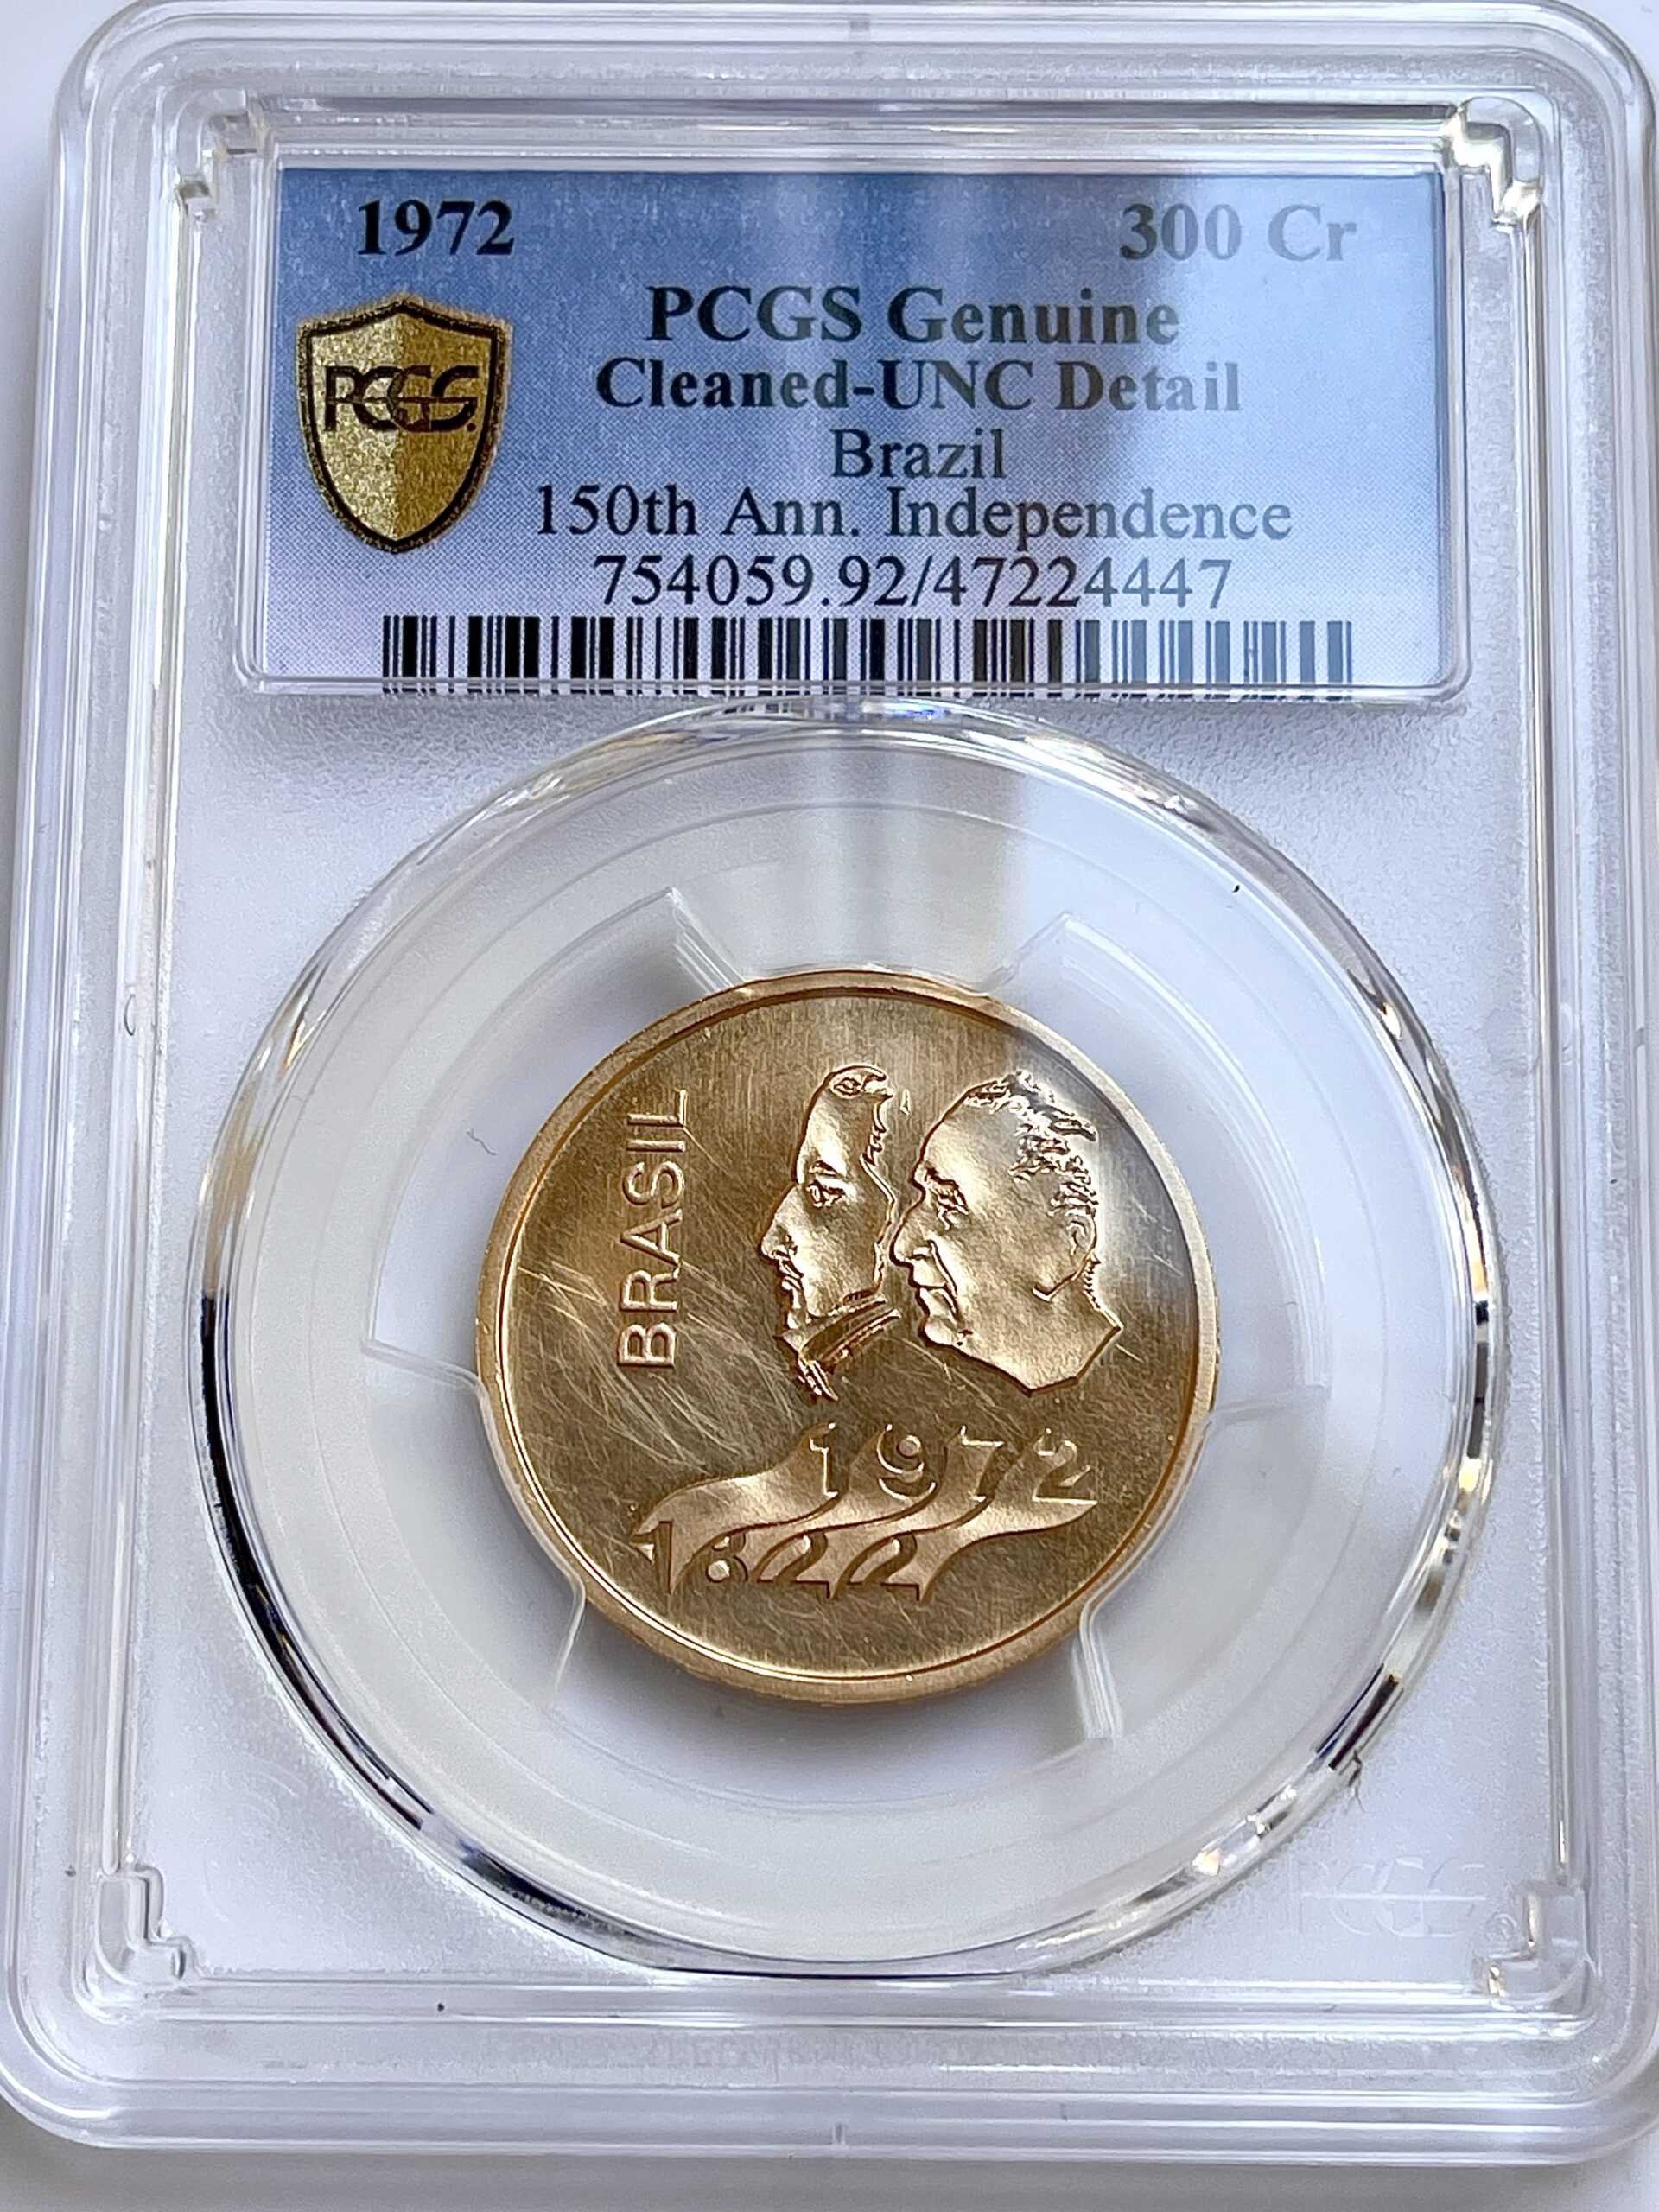 Brazil 1972 300 Cruzeiros 150 years of independence PCGS UNC